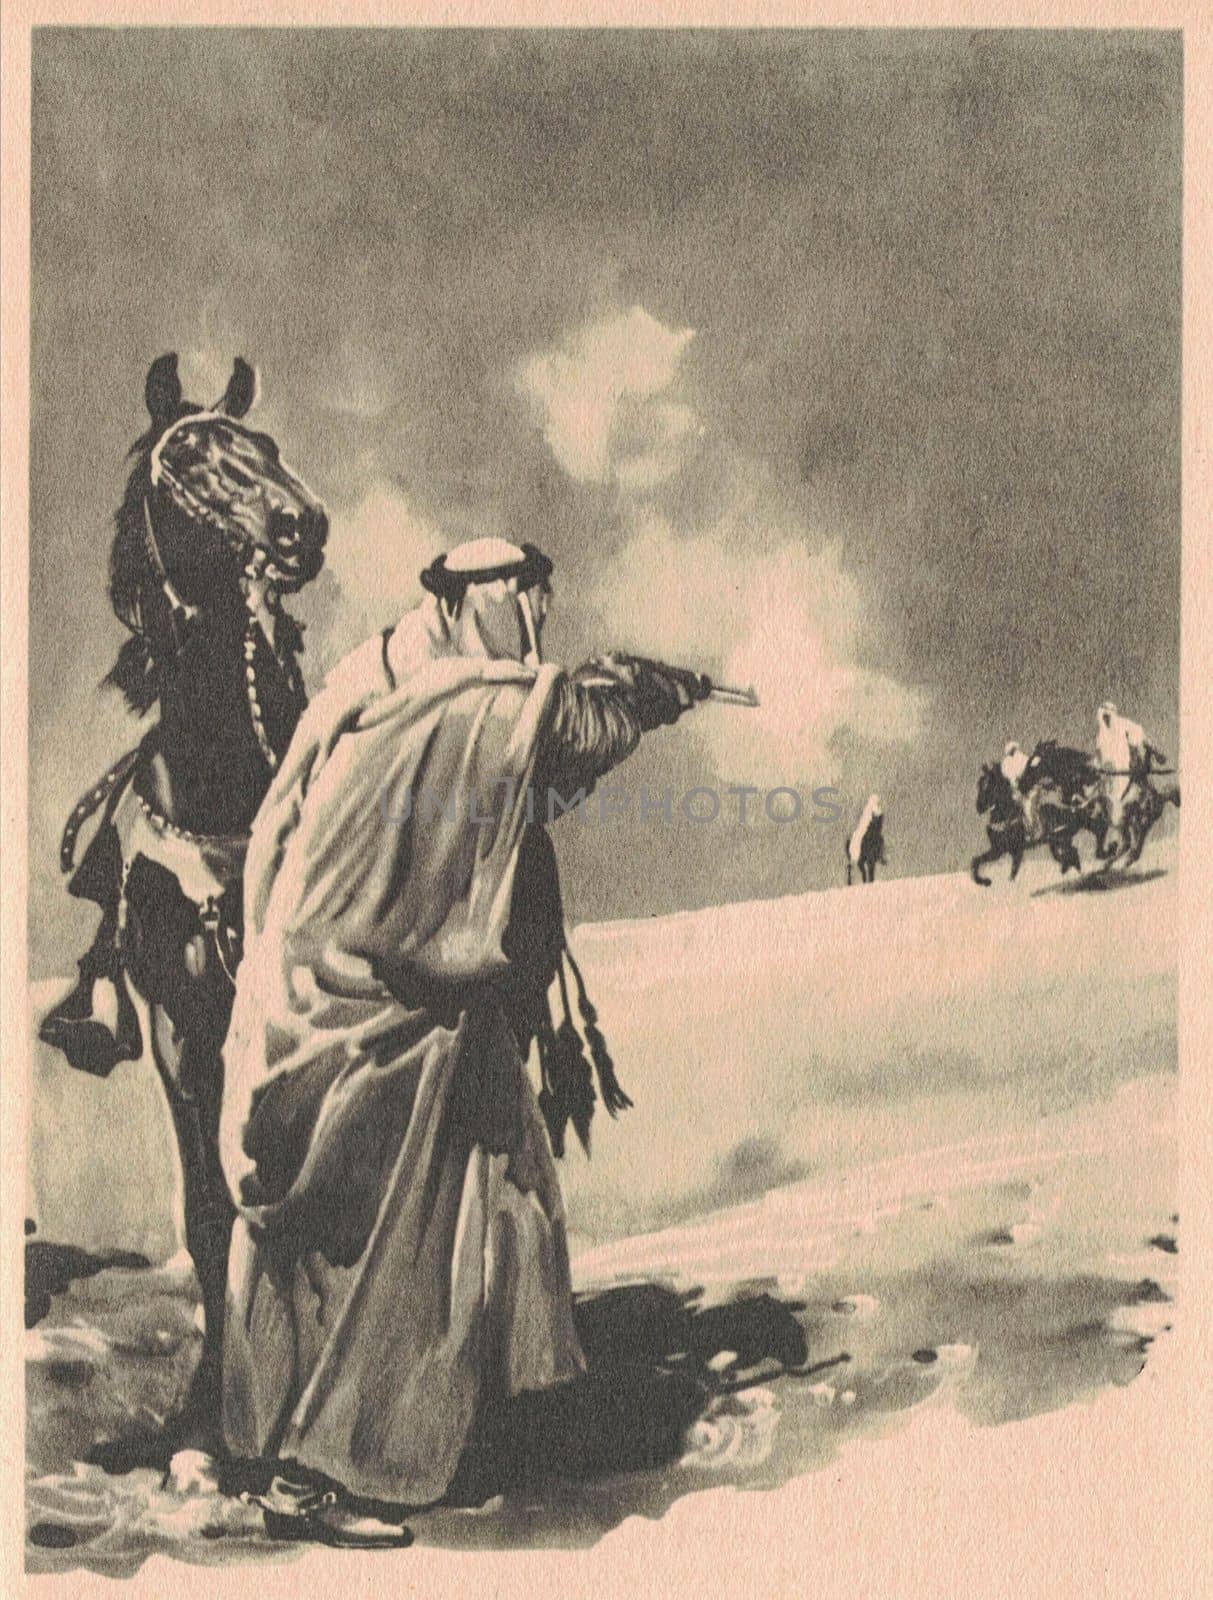 Black and white illustration shows an Arab shooting at other Arabs. Vintage black and white picture shows adventure life in the previous century by roman_nerud